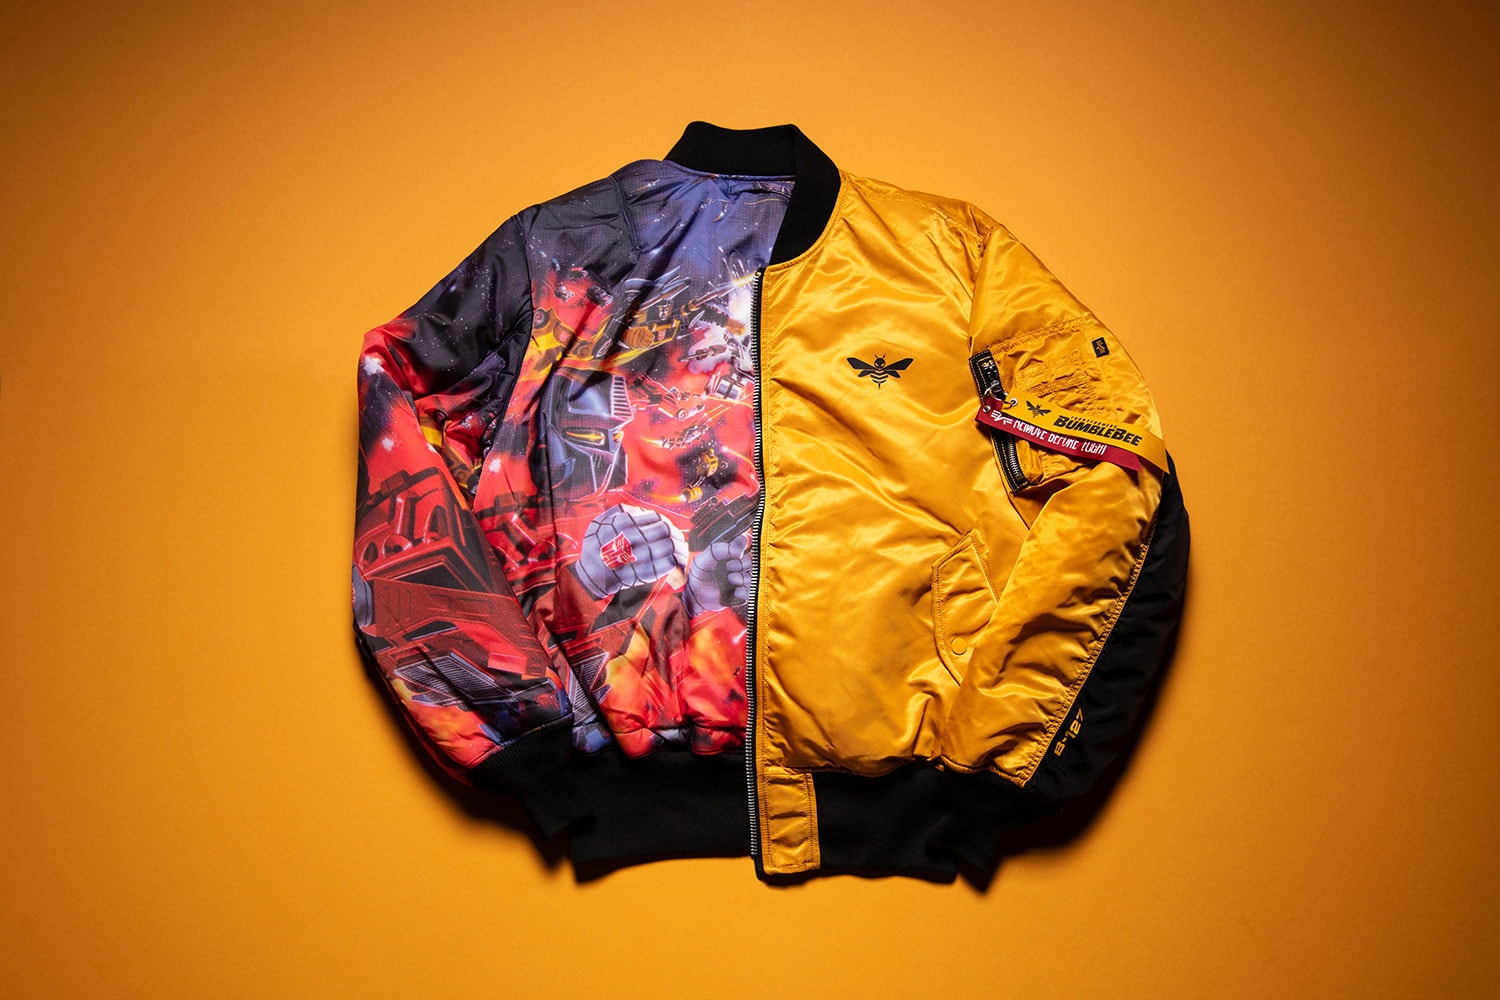 Hasbro Alpha Industries MA-1 Flight Jacket Bumblebee Transformers reversible yellow movie michael bay limited edition win raffle sign up early access buy purchase sale film tie in merch